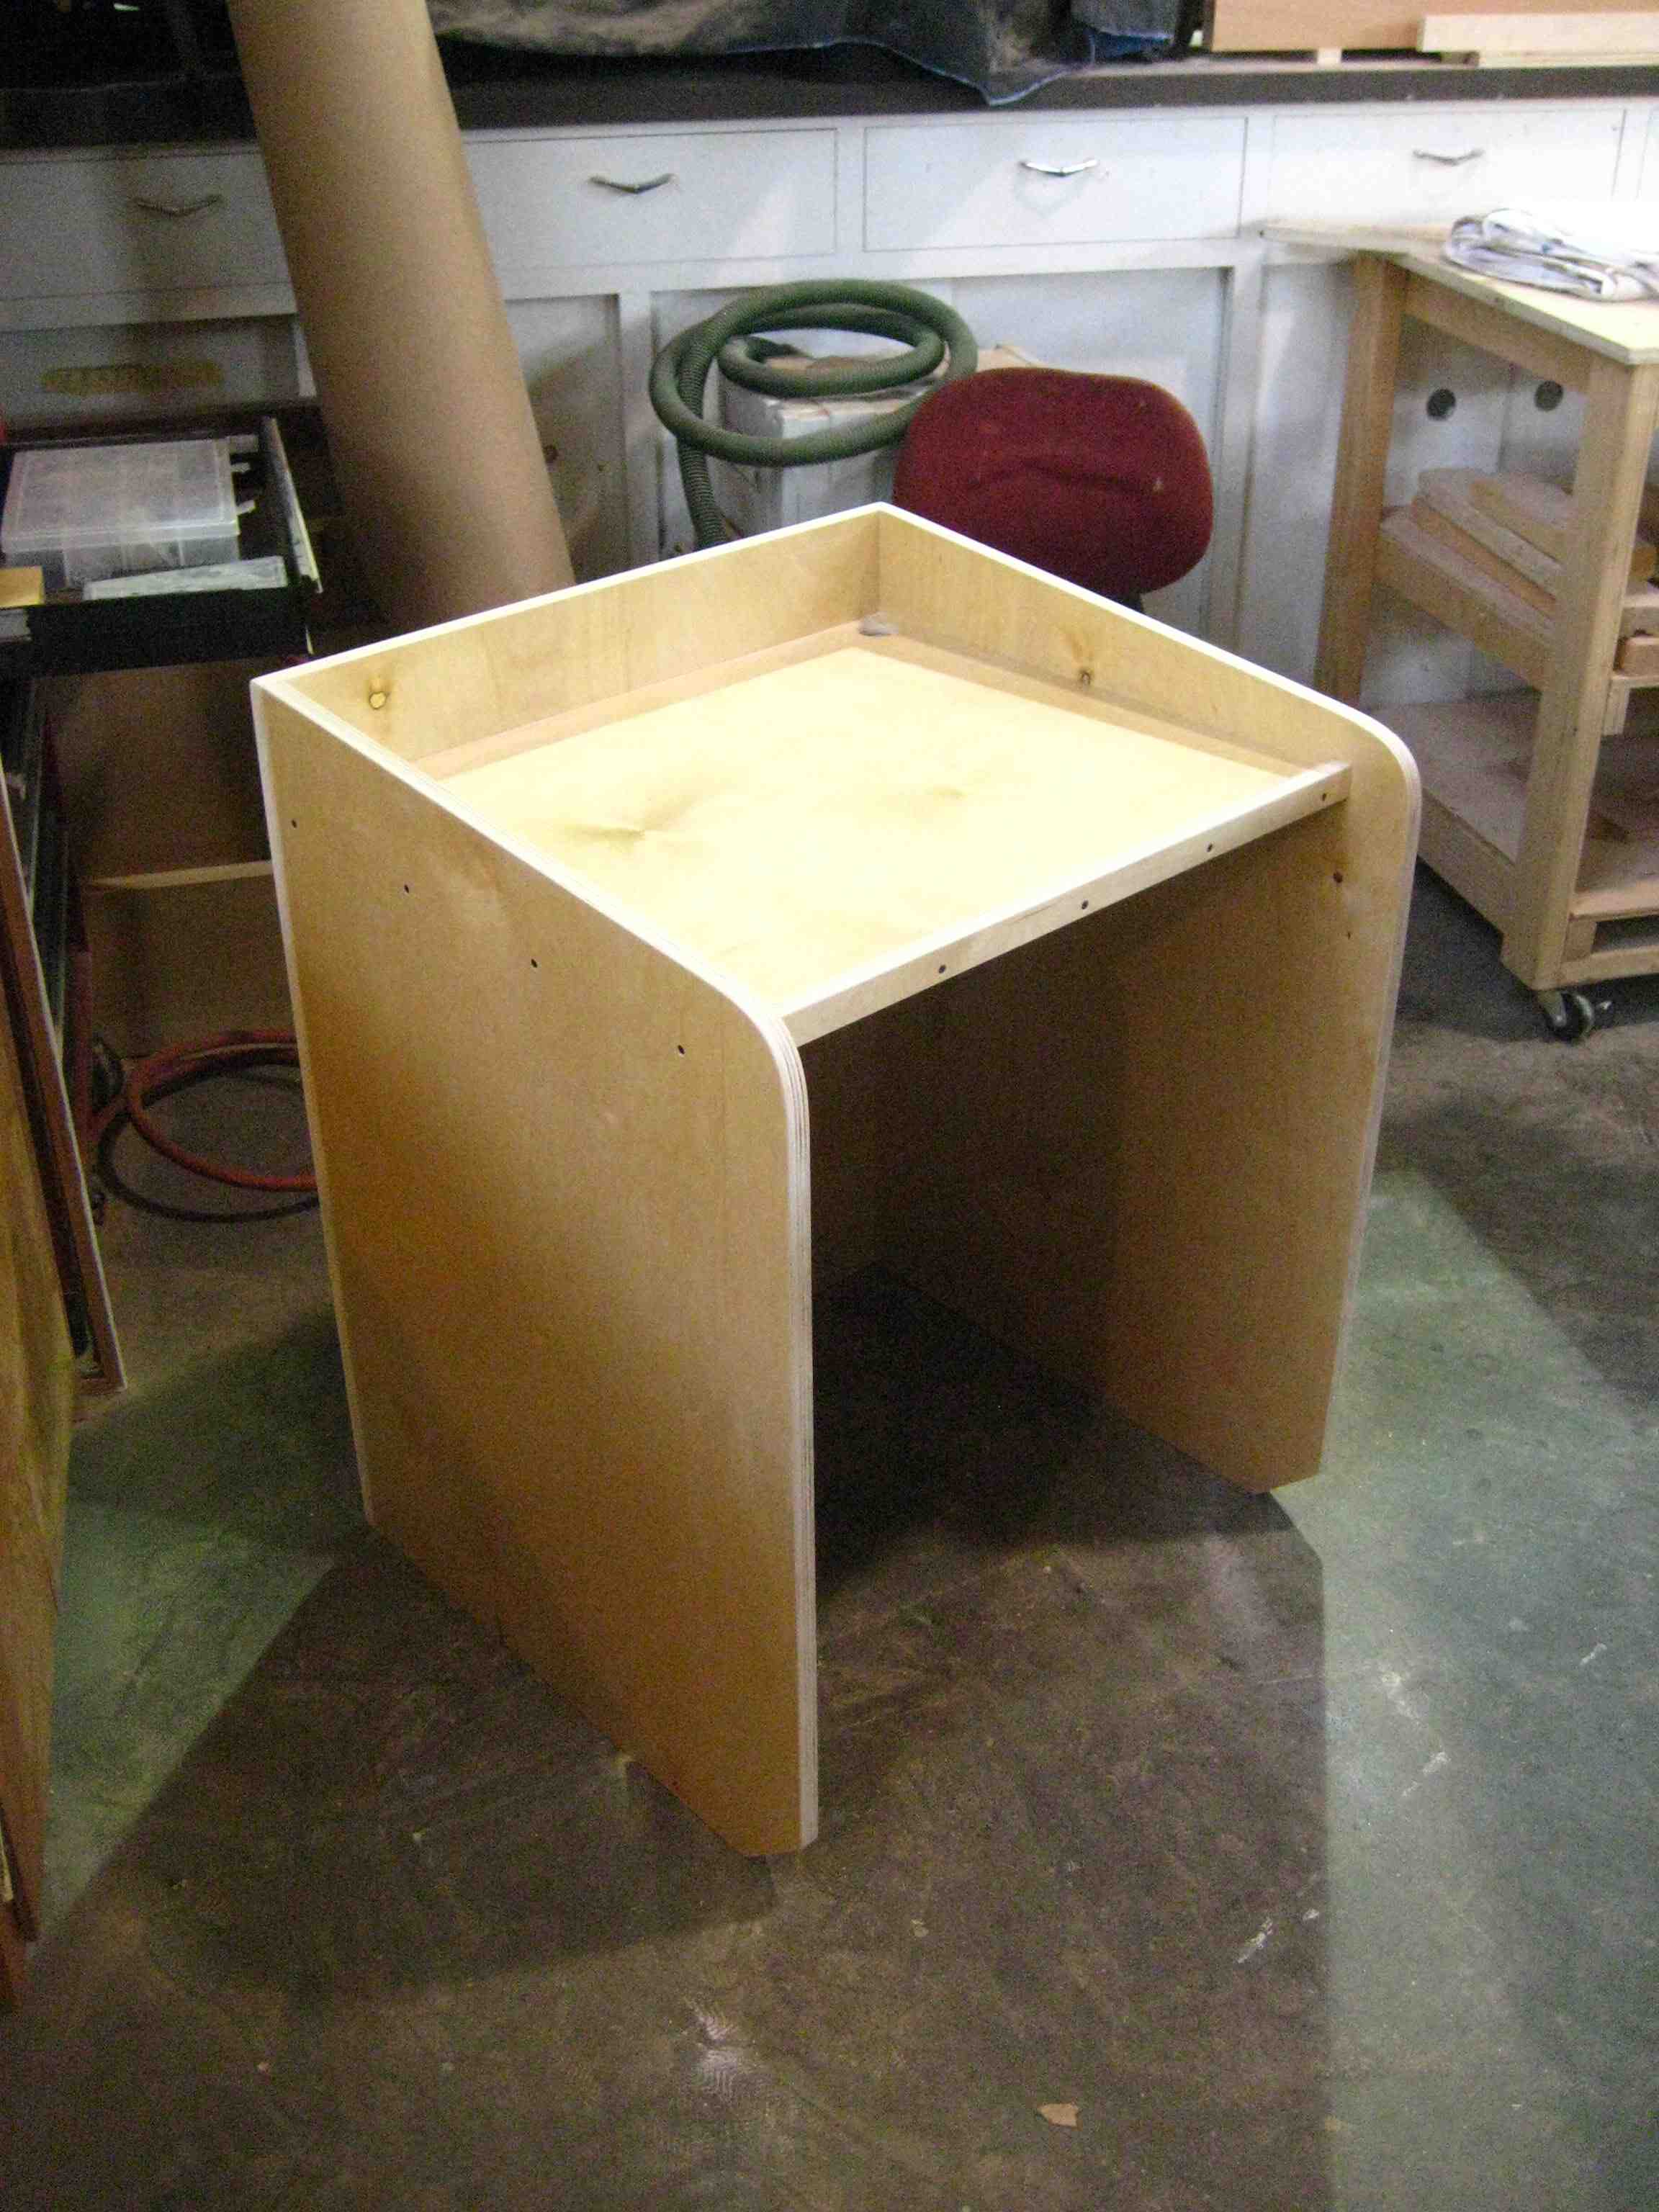 A properly scaled wooden lectern, with sides and surface modeled after those you'd find in a standard height.